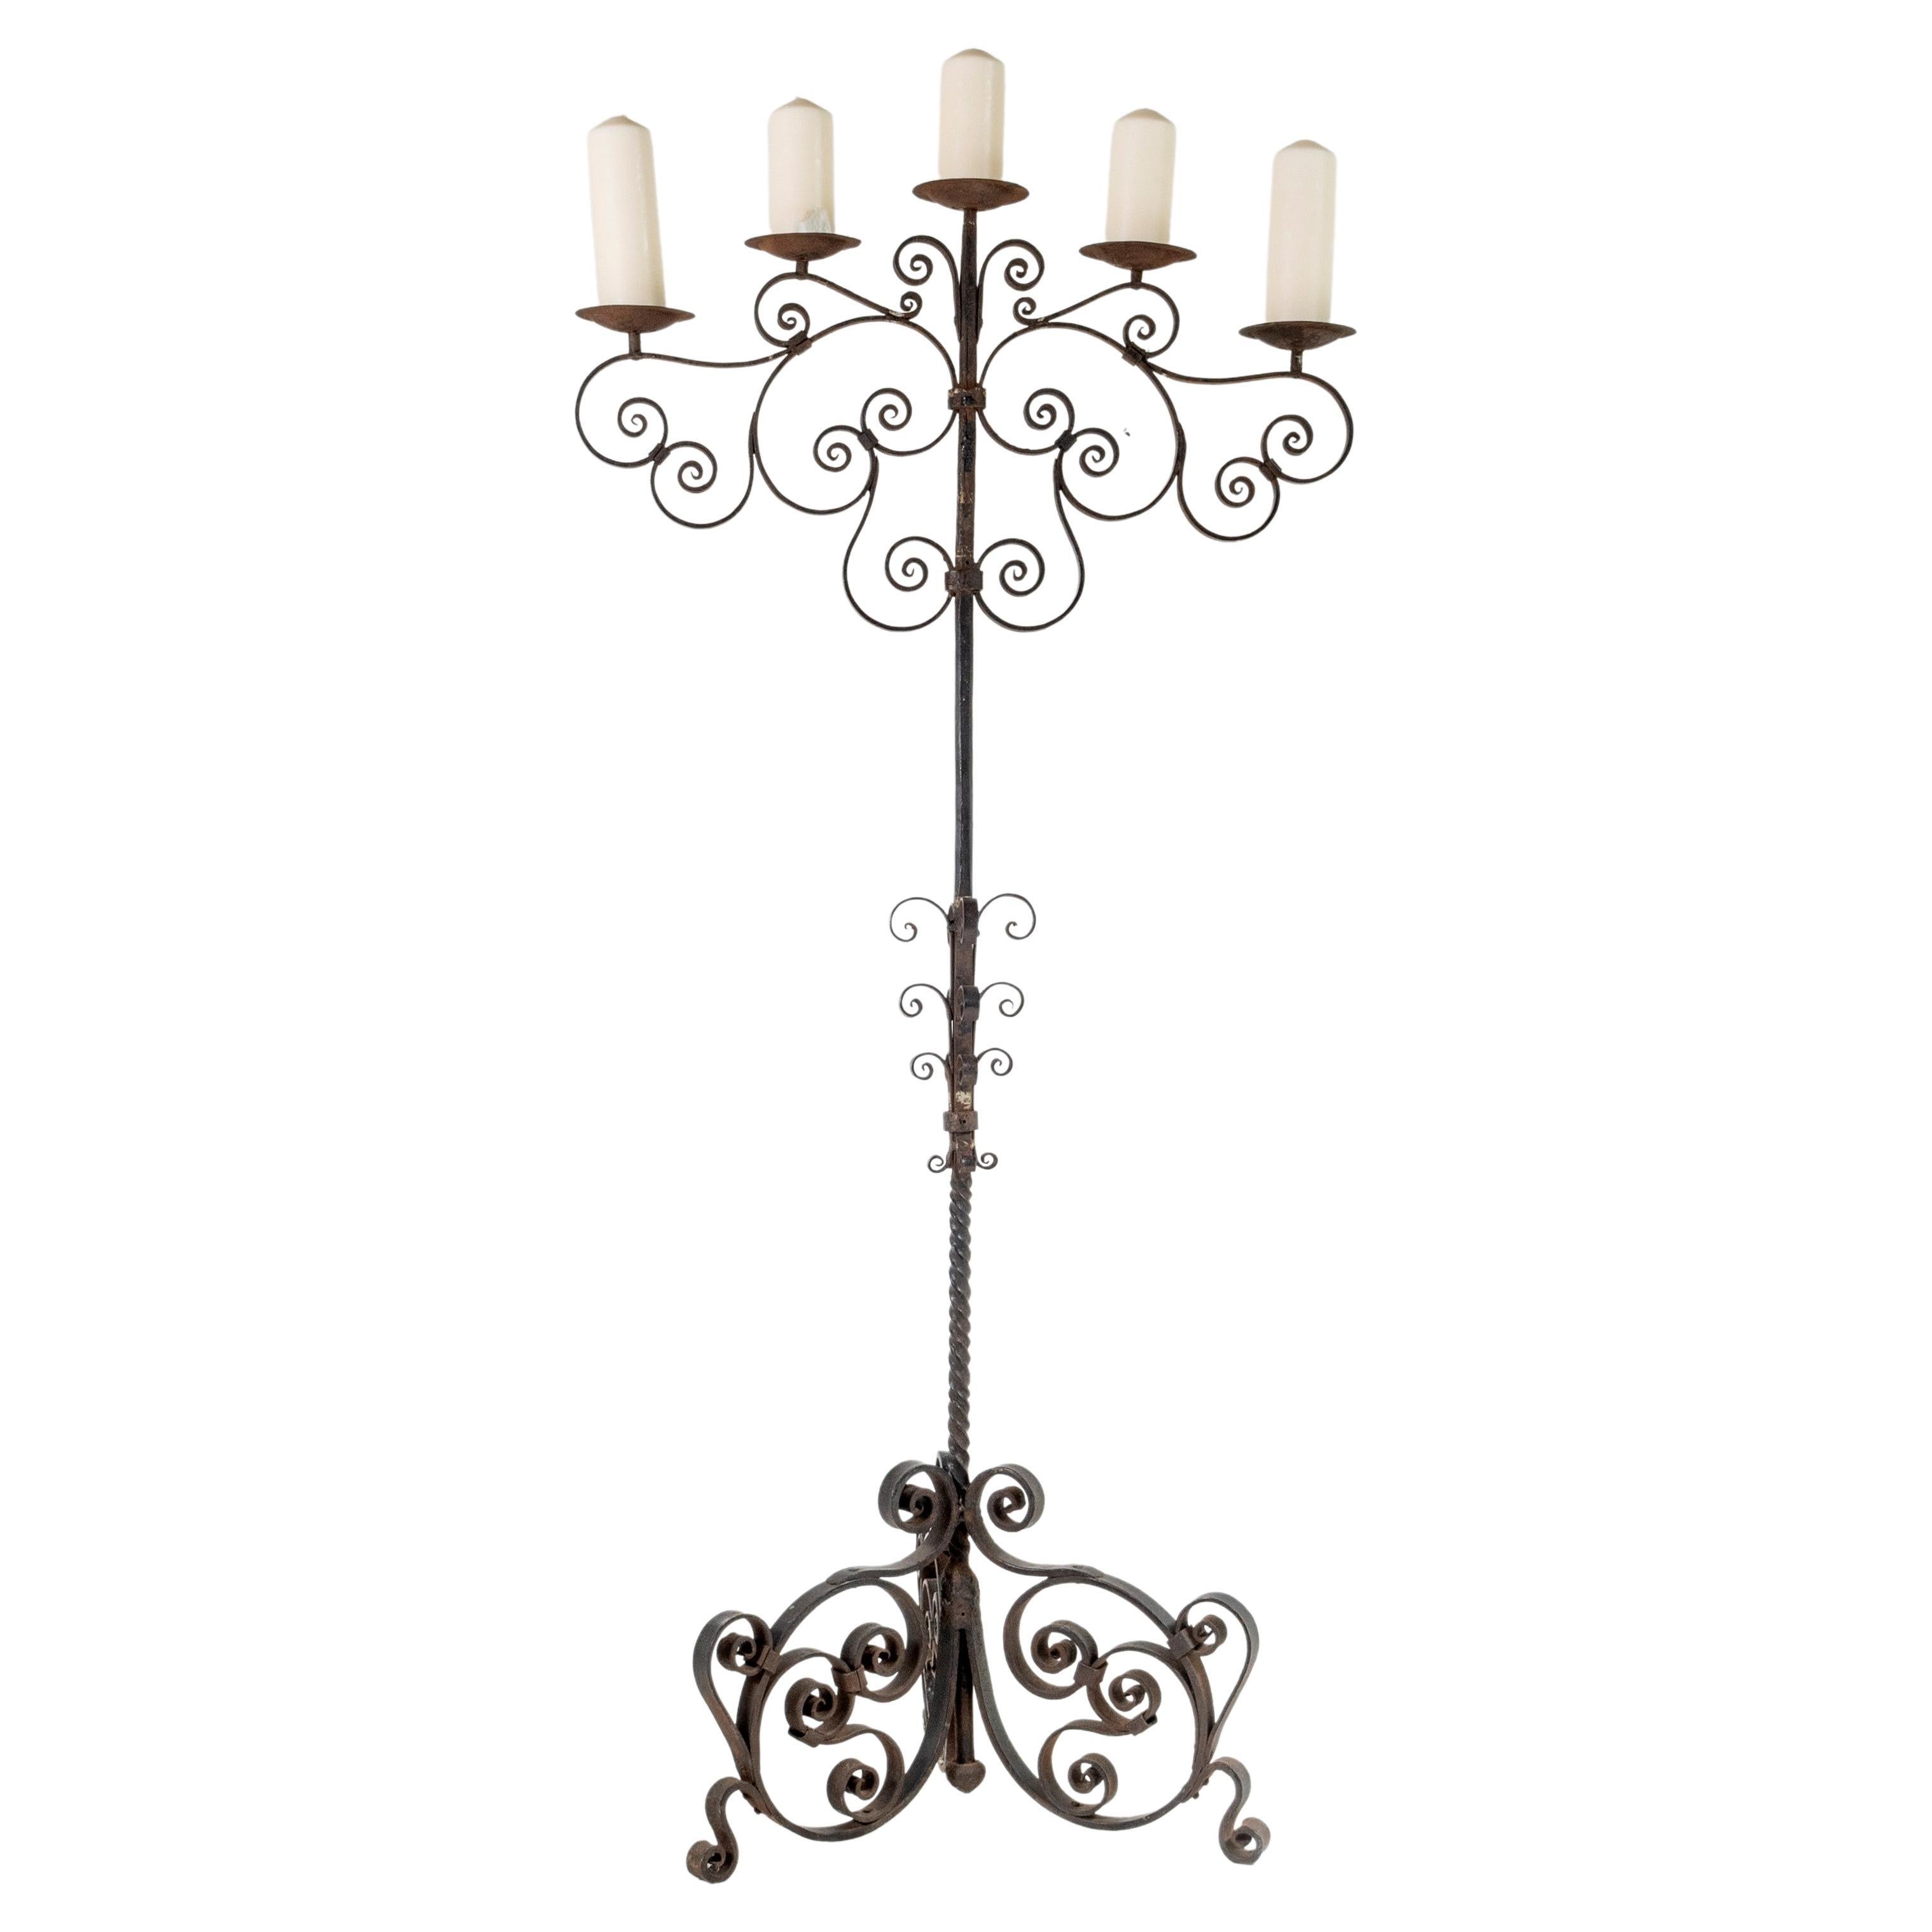 English Castle Candelabra Large Scale Heavy Wrought Iron Pricket Candle Tree For Sale